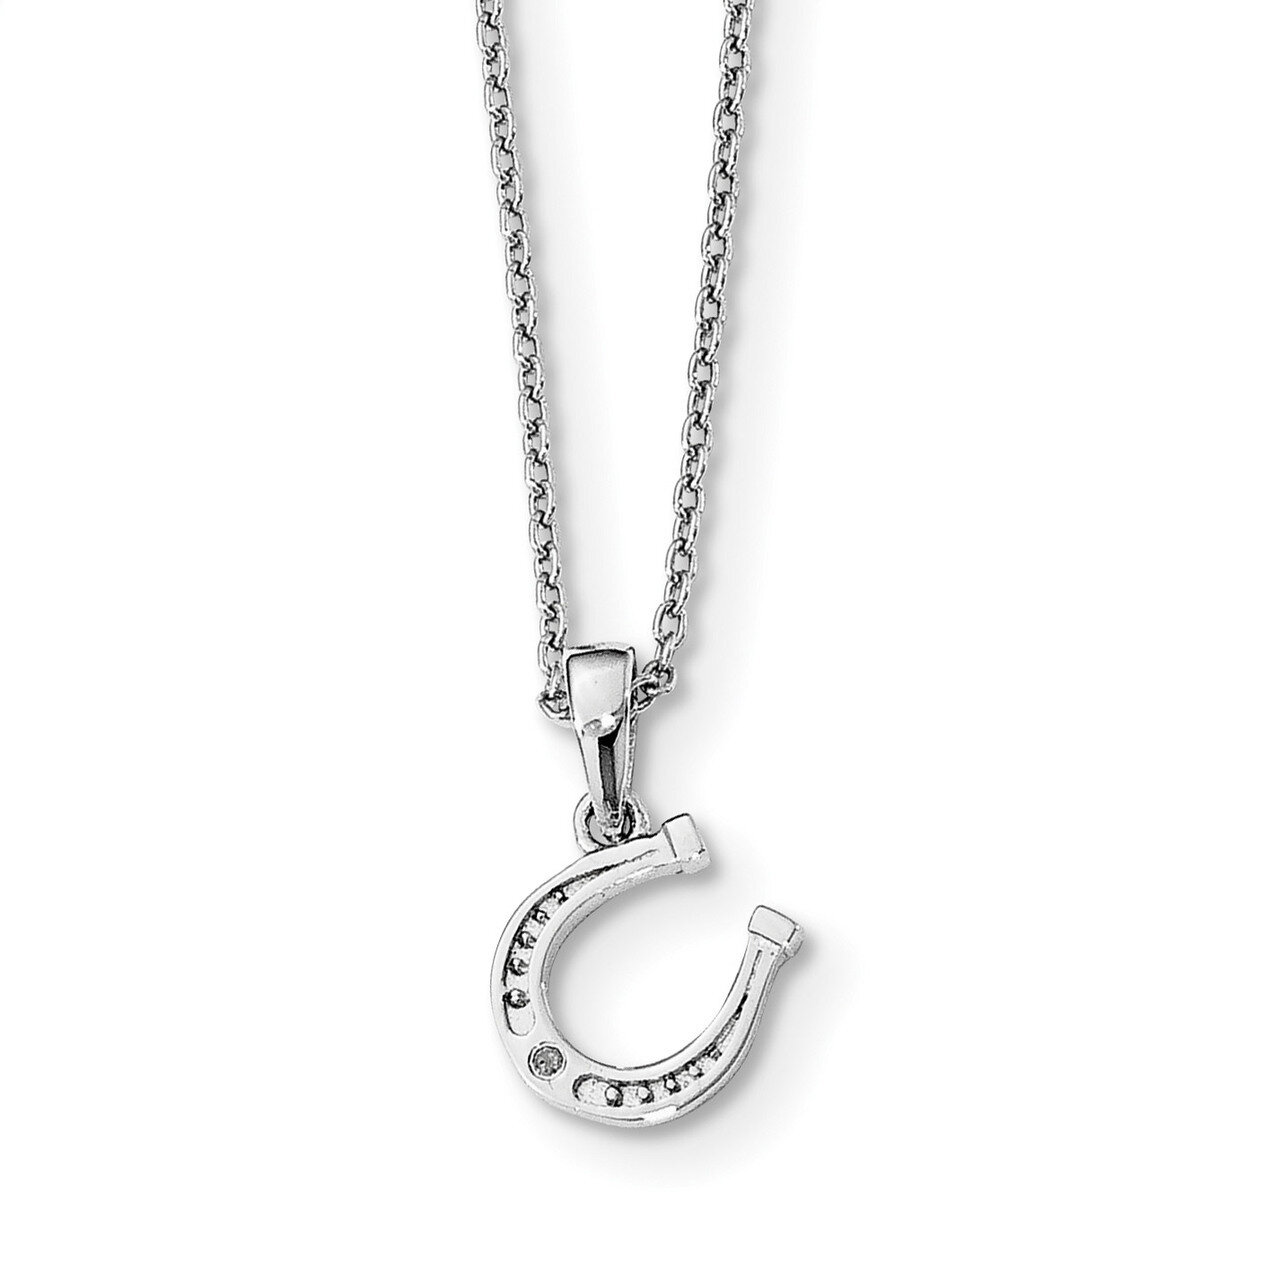 Horseshoe Necklace Diamond Sterling Silver QW444-18